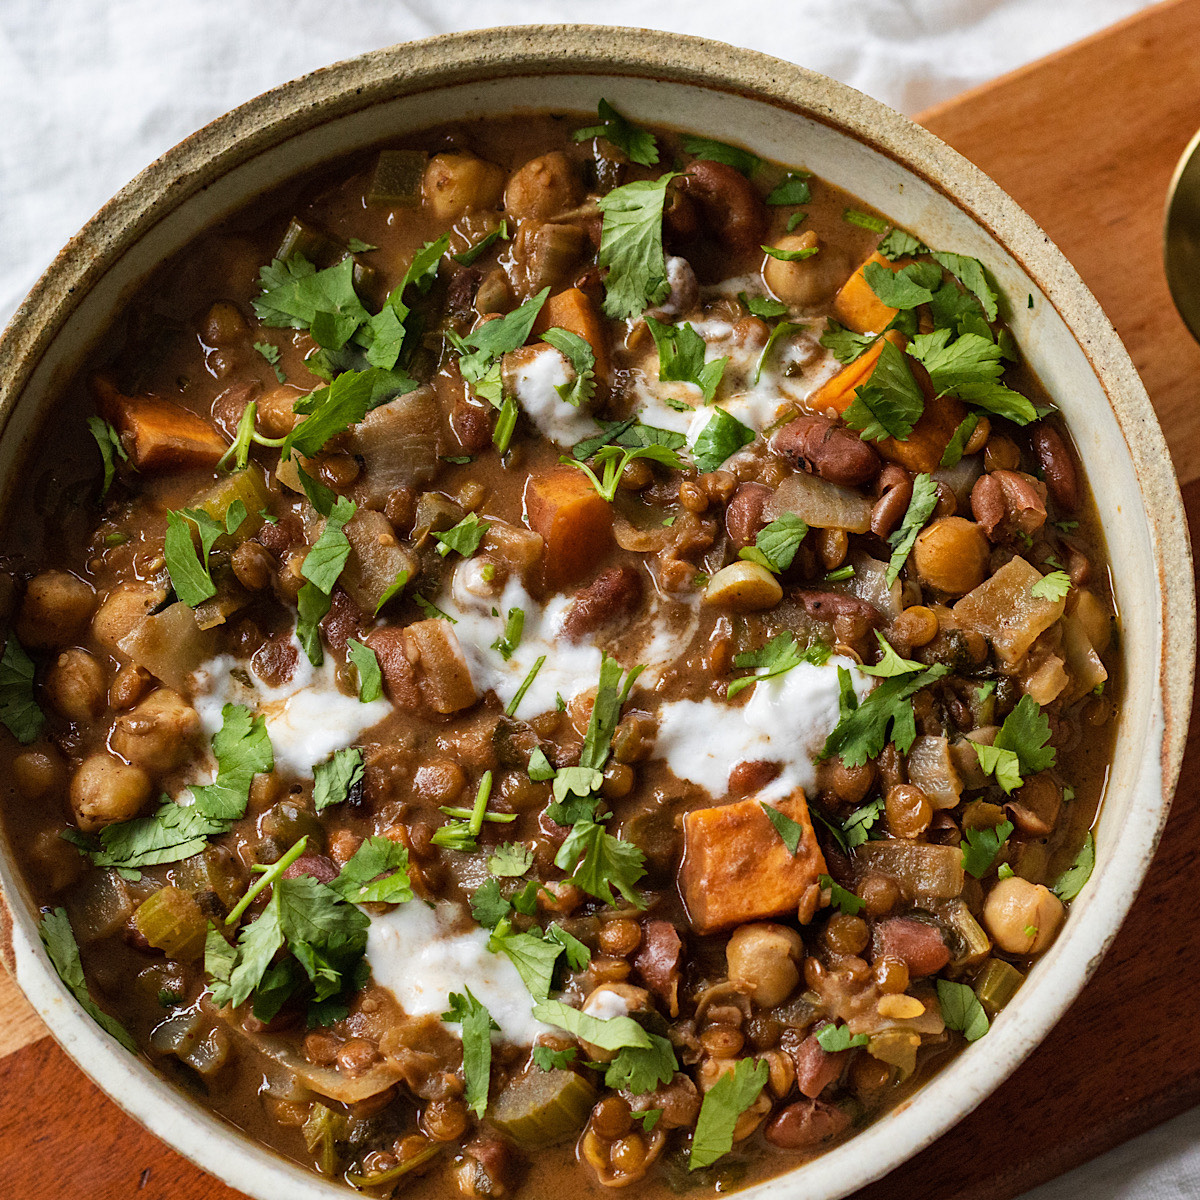 Vegan Bean and Lentil White Chili with Coconut Milk by Avocado Skillet